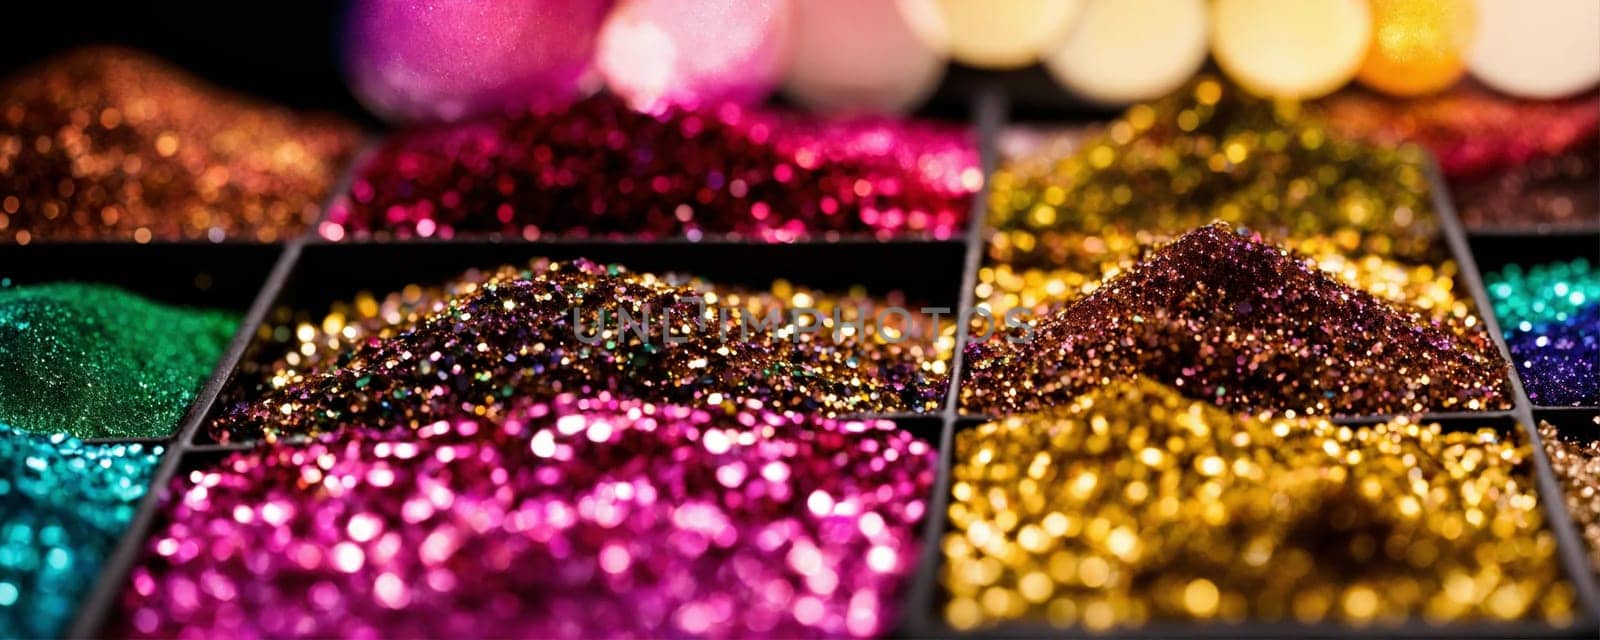 cosmetics glitter and makeup shadows. Selective focus. by mila1784